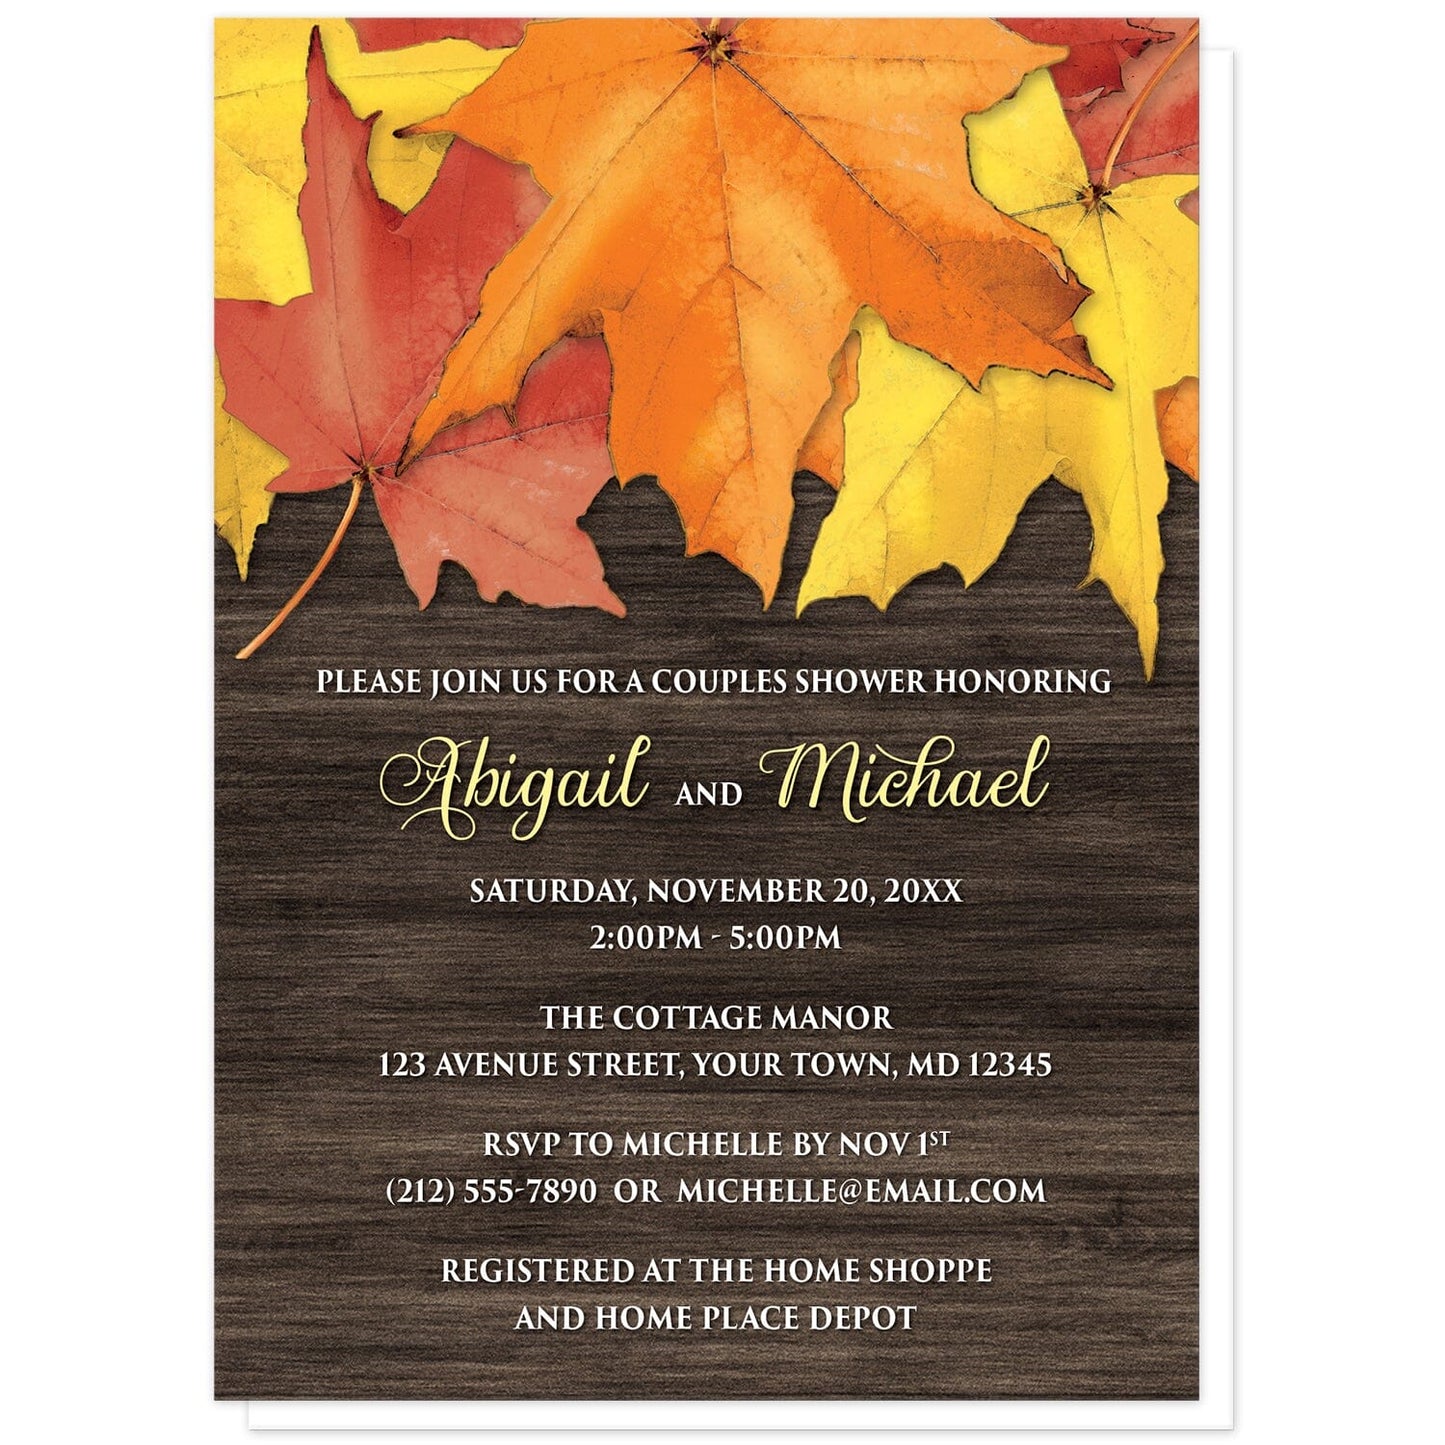 Rustic Autumn Leaves Wood Couples Shower Invitations at Artistically Invited. Southern-inspired rustic autumn leaves wood couples shower invitations with an arrangement of rustic yellow, orange, and red fall leaves along the top over a dark brown wood pattern. Your personalized couples shower celebration details are custom printed in yellow and white over the rustic wood background. 